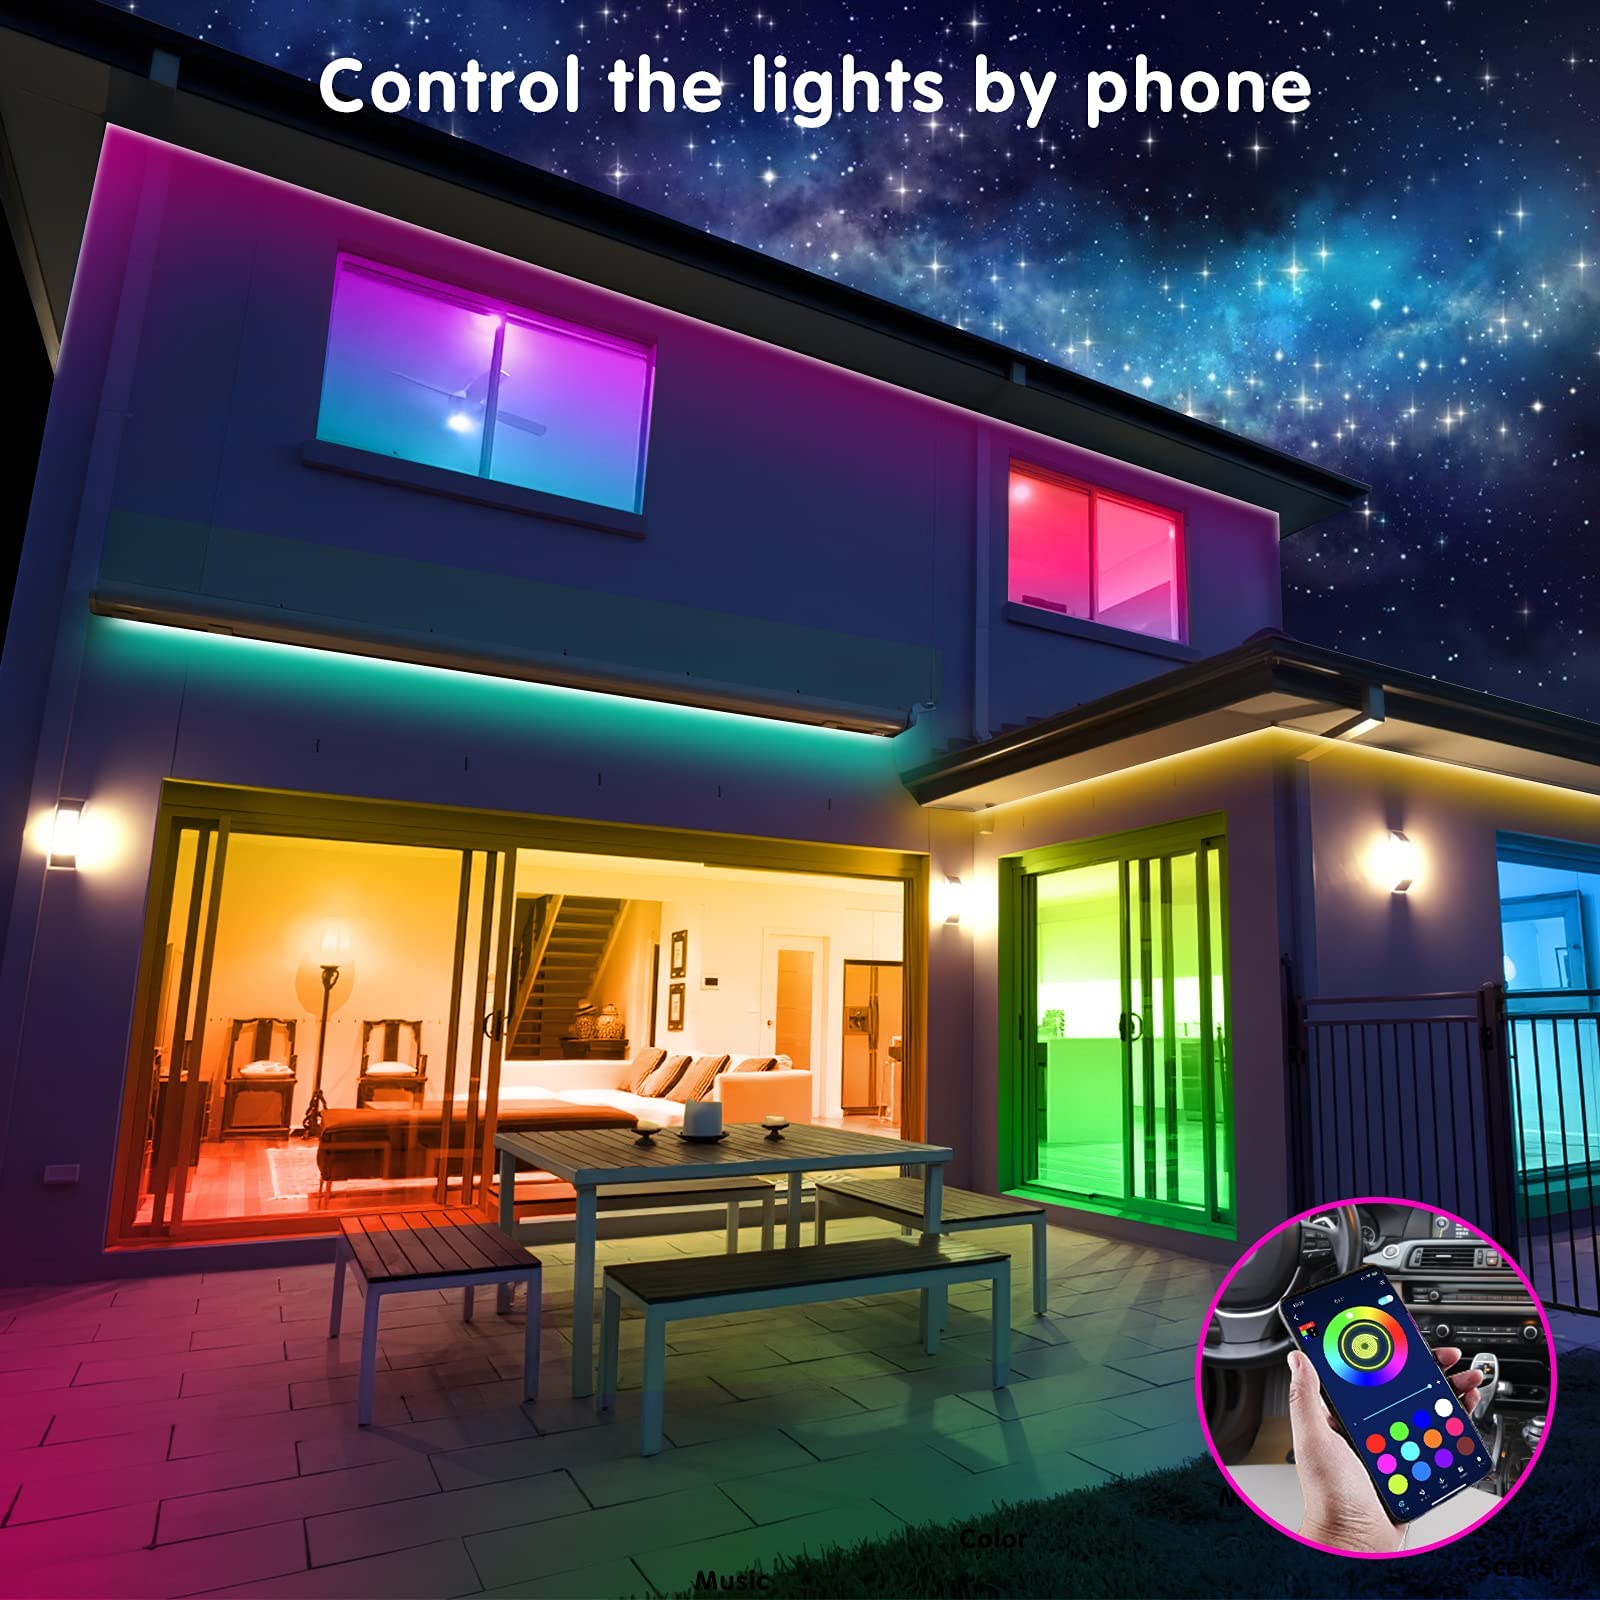 smareal Led Lights 50ft Smart APP Control Music Sync Led Strip Lights RGB Color Changing Led Lights Strips with Remote Led Lights for Bedroom Kitchen and Party